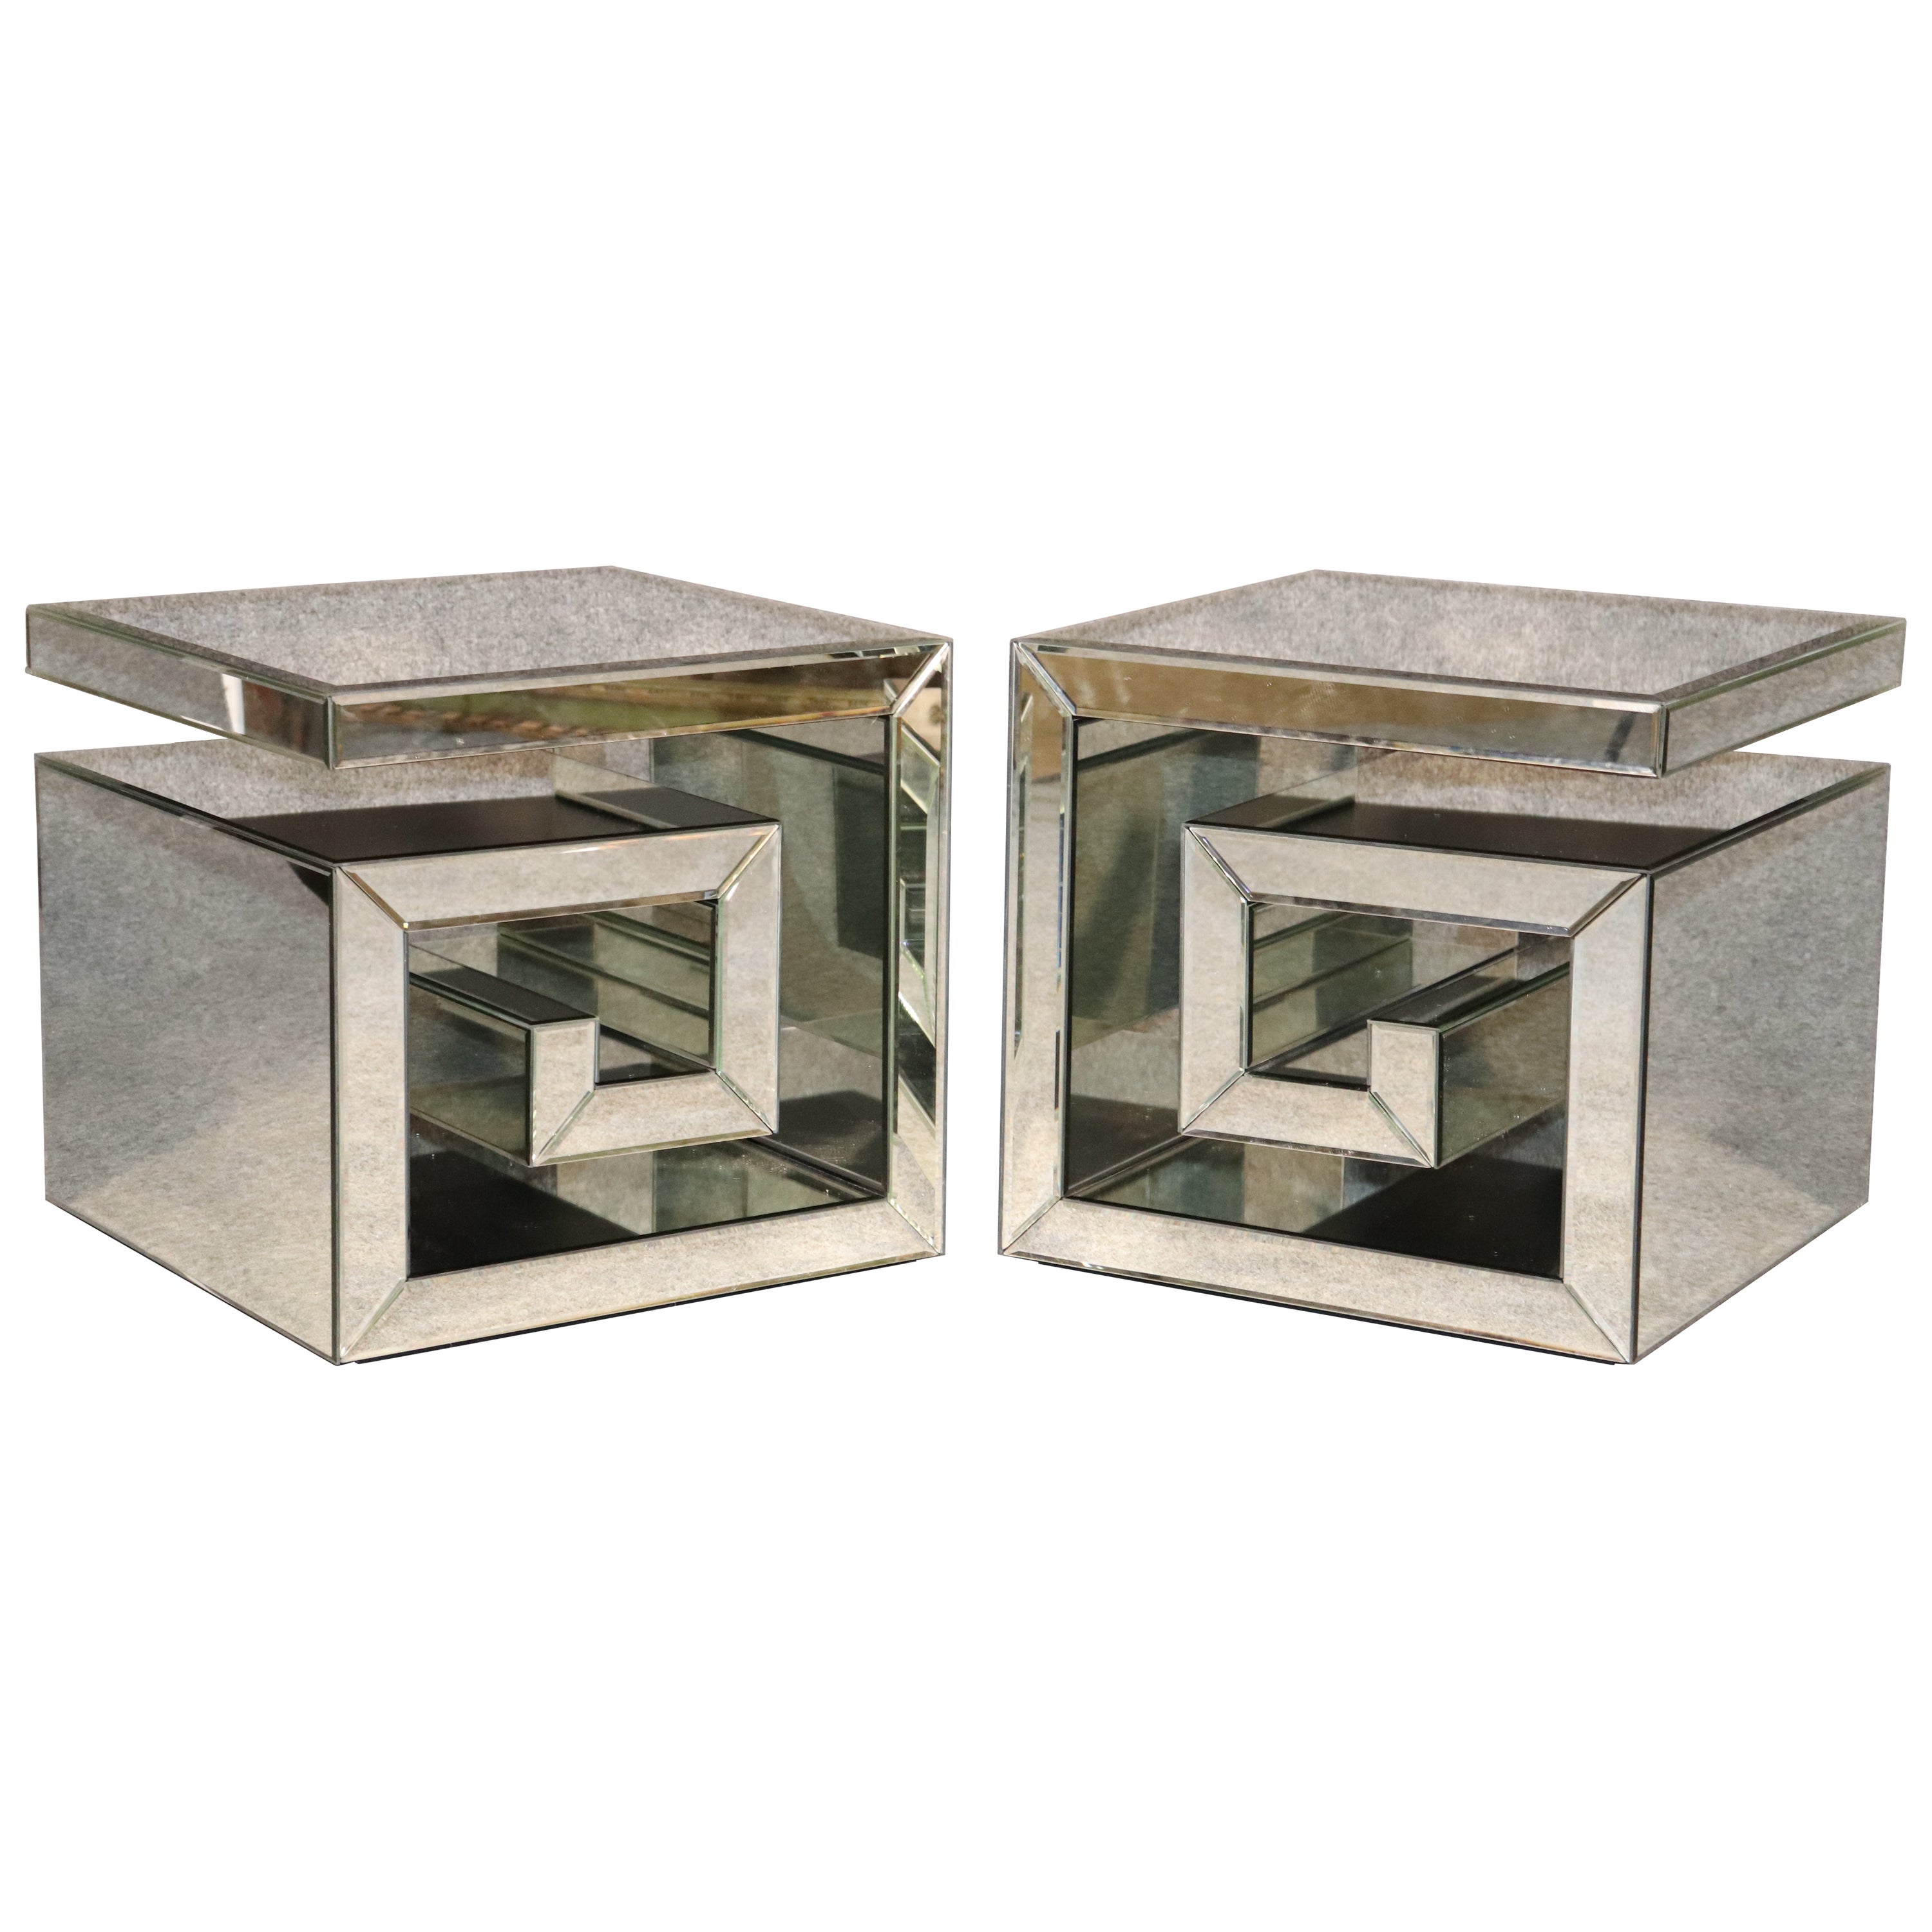 Mirrored Spiral Tables For Sale